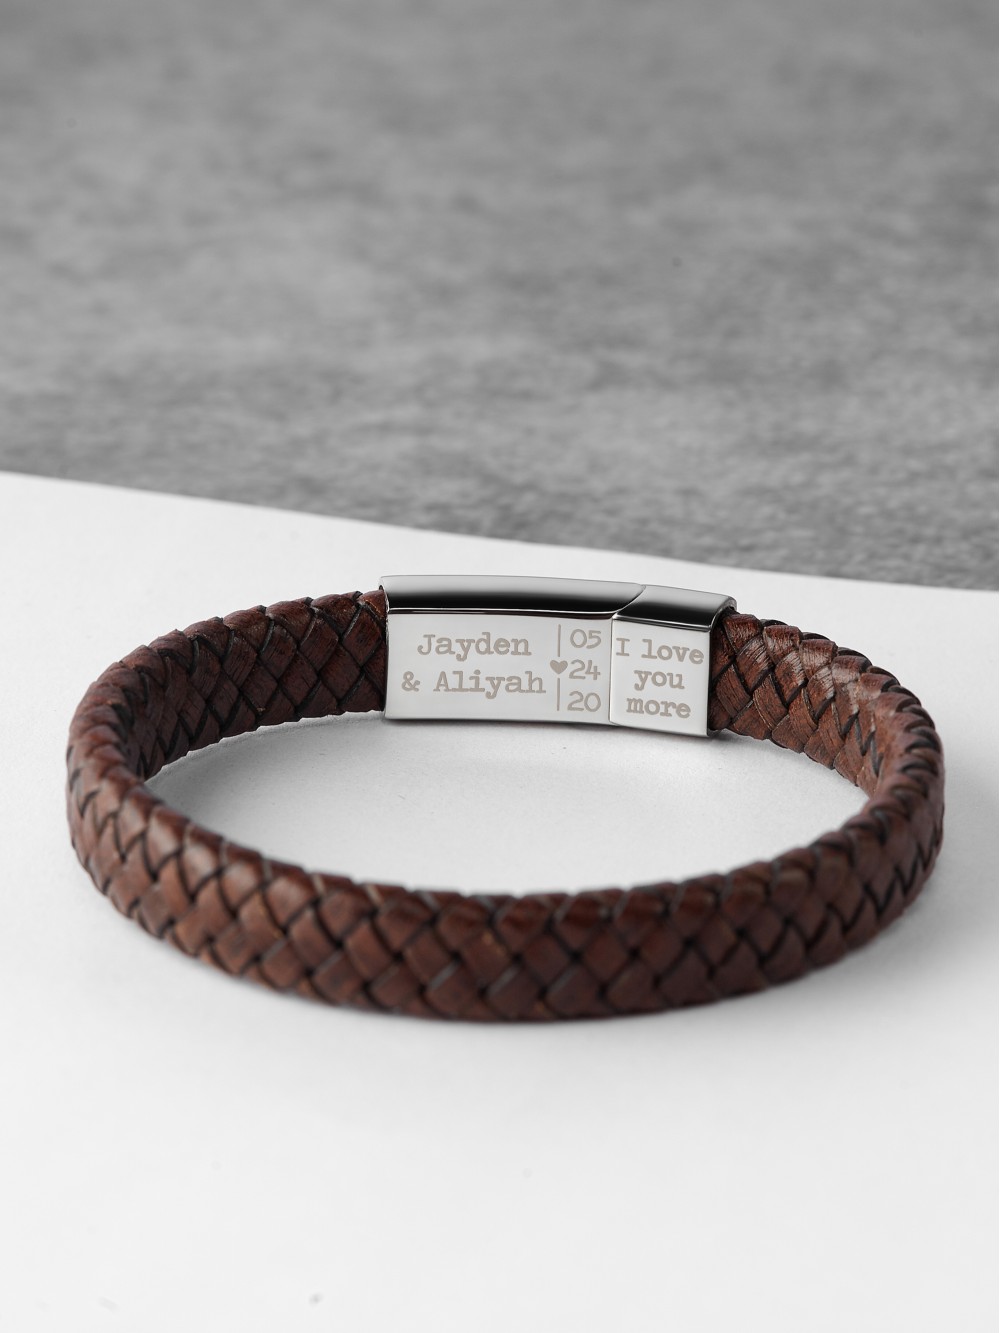 Braided Leather Bracelet With Date